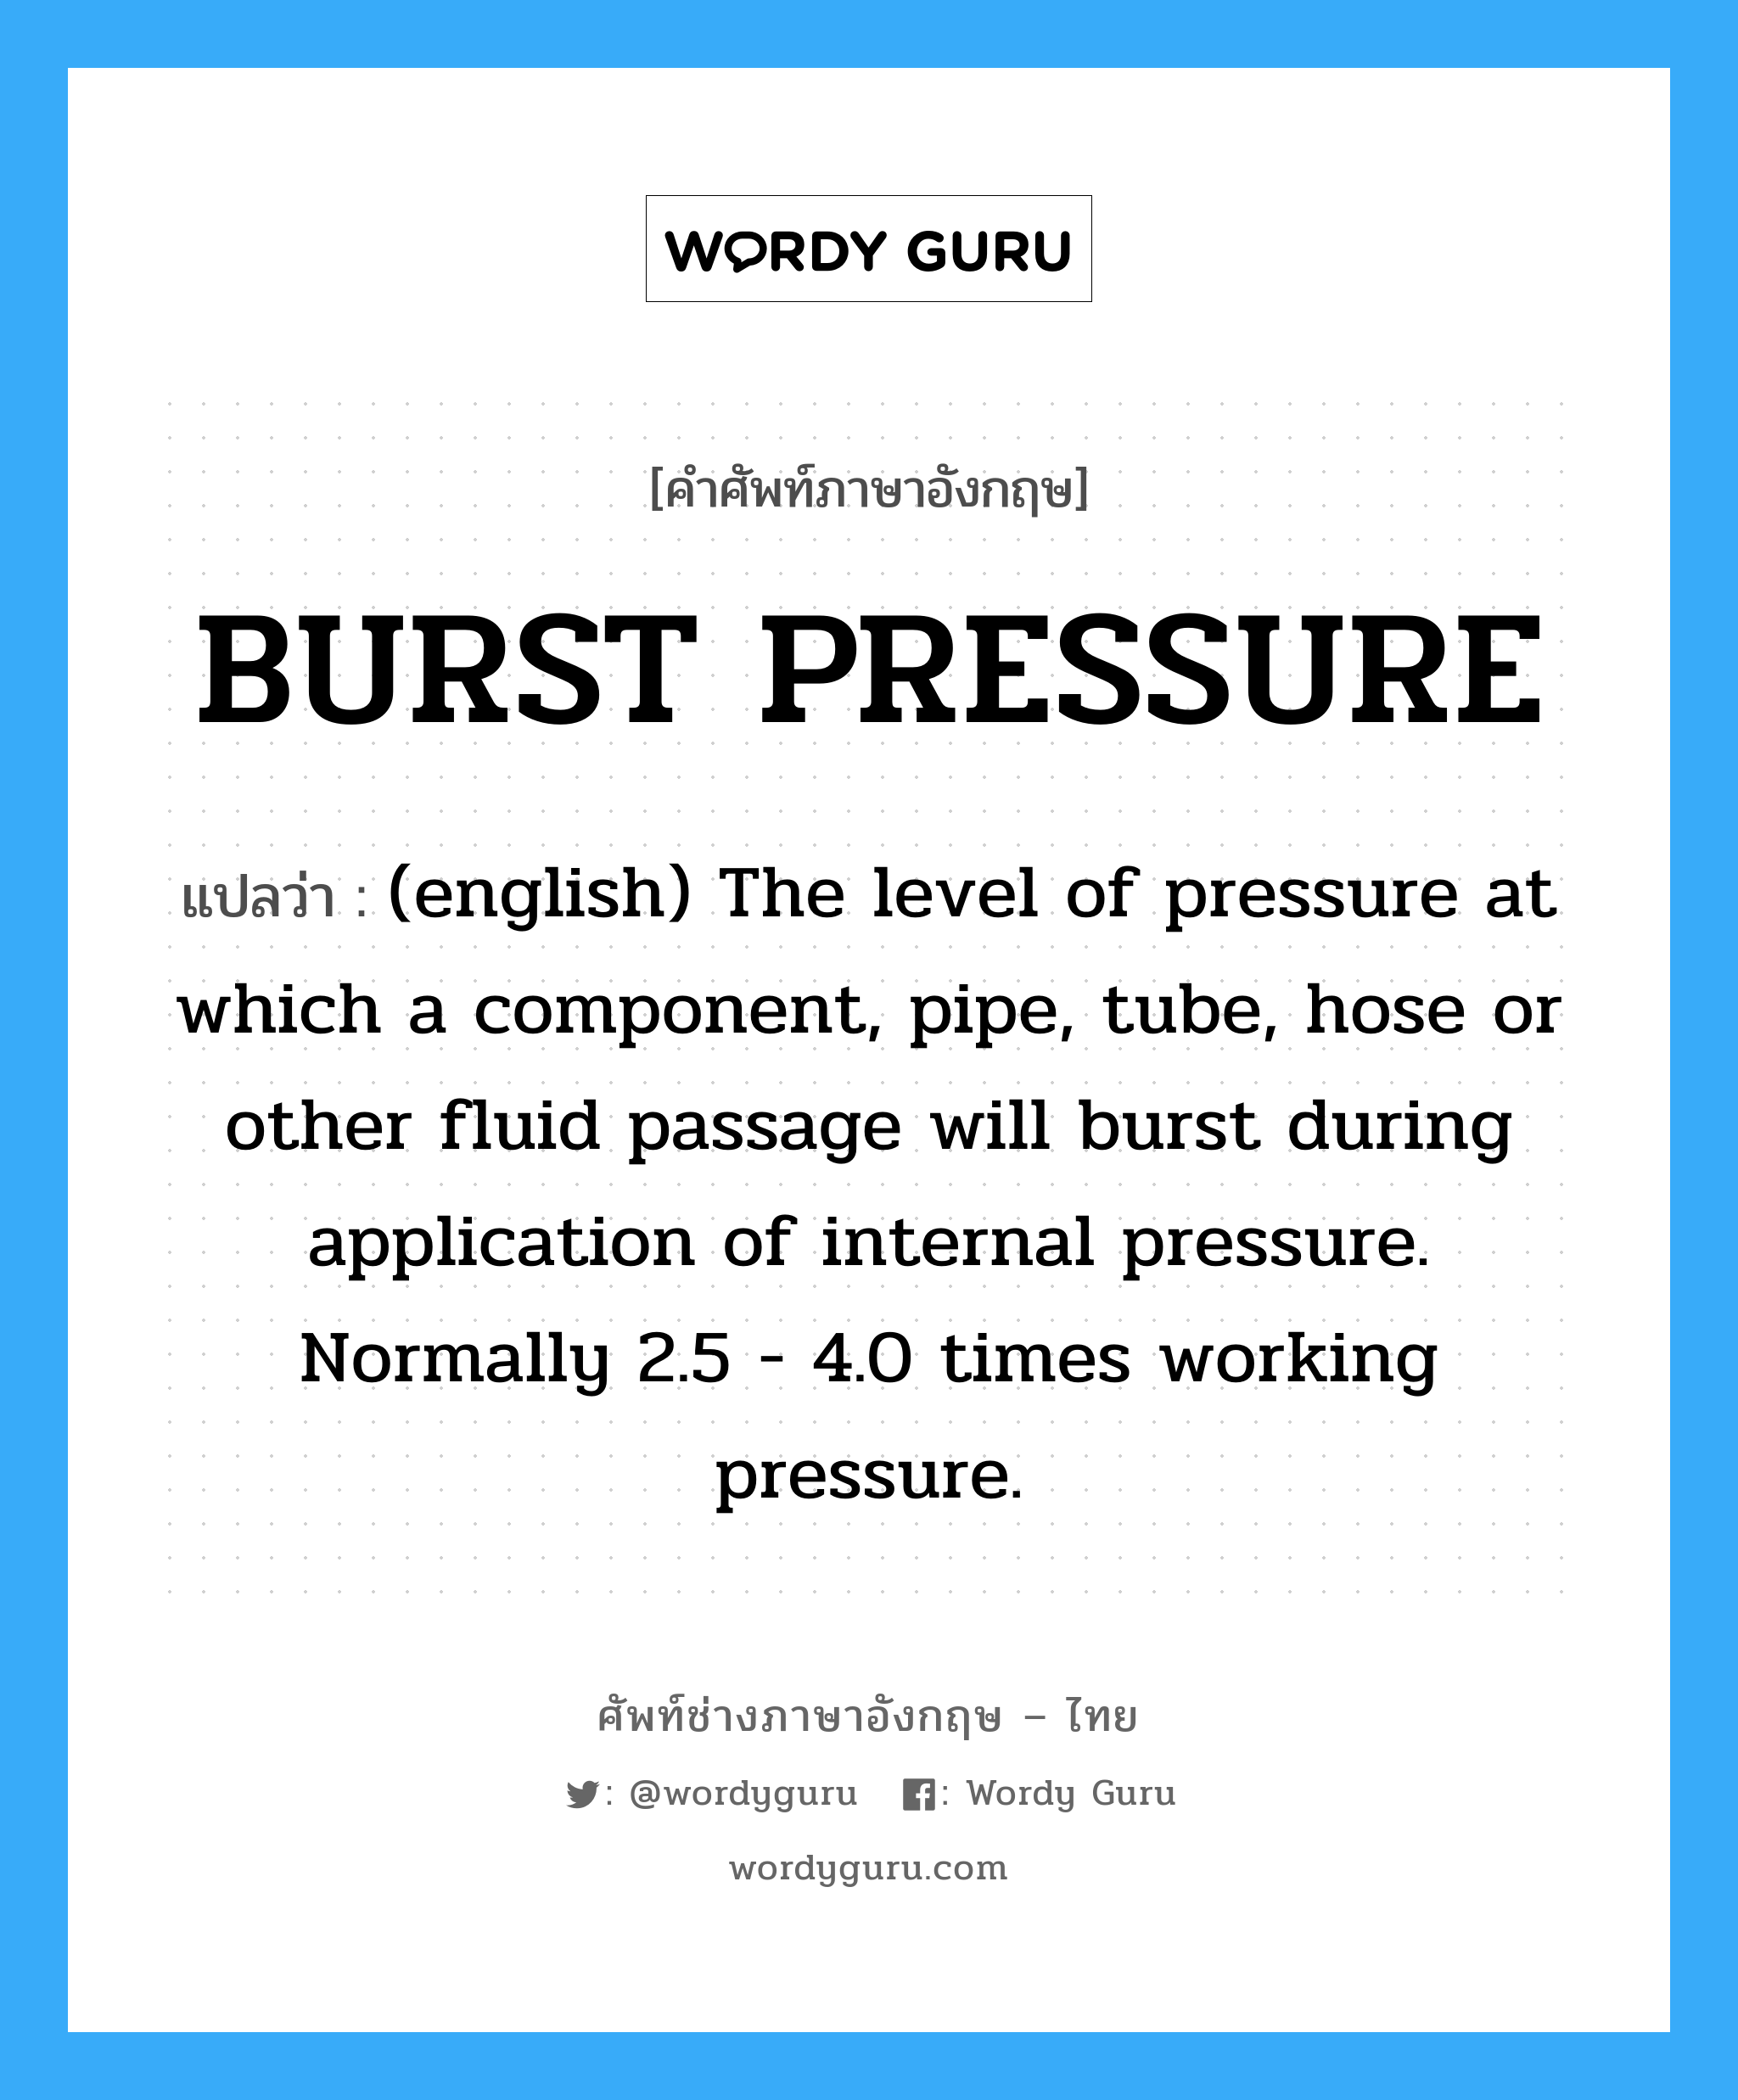 BURST PRESSURE แปลว่า?, คำศัพท์ช่างภาษาอังกฤษ - ไทย BURST PRESSURE คำศัพท์ภาษาอังกฤษ BURST PRESSURE แปลว่า (english) The level of pressure at which a component, pipe, tube, hose or other fluid passage will burst during application of internal pressure. Normally 2.5 - 4.0 times working pressure.